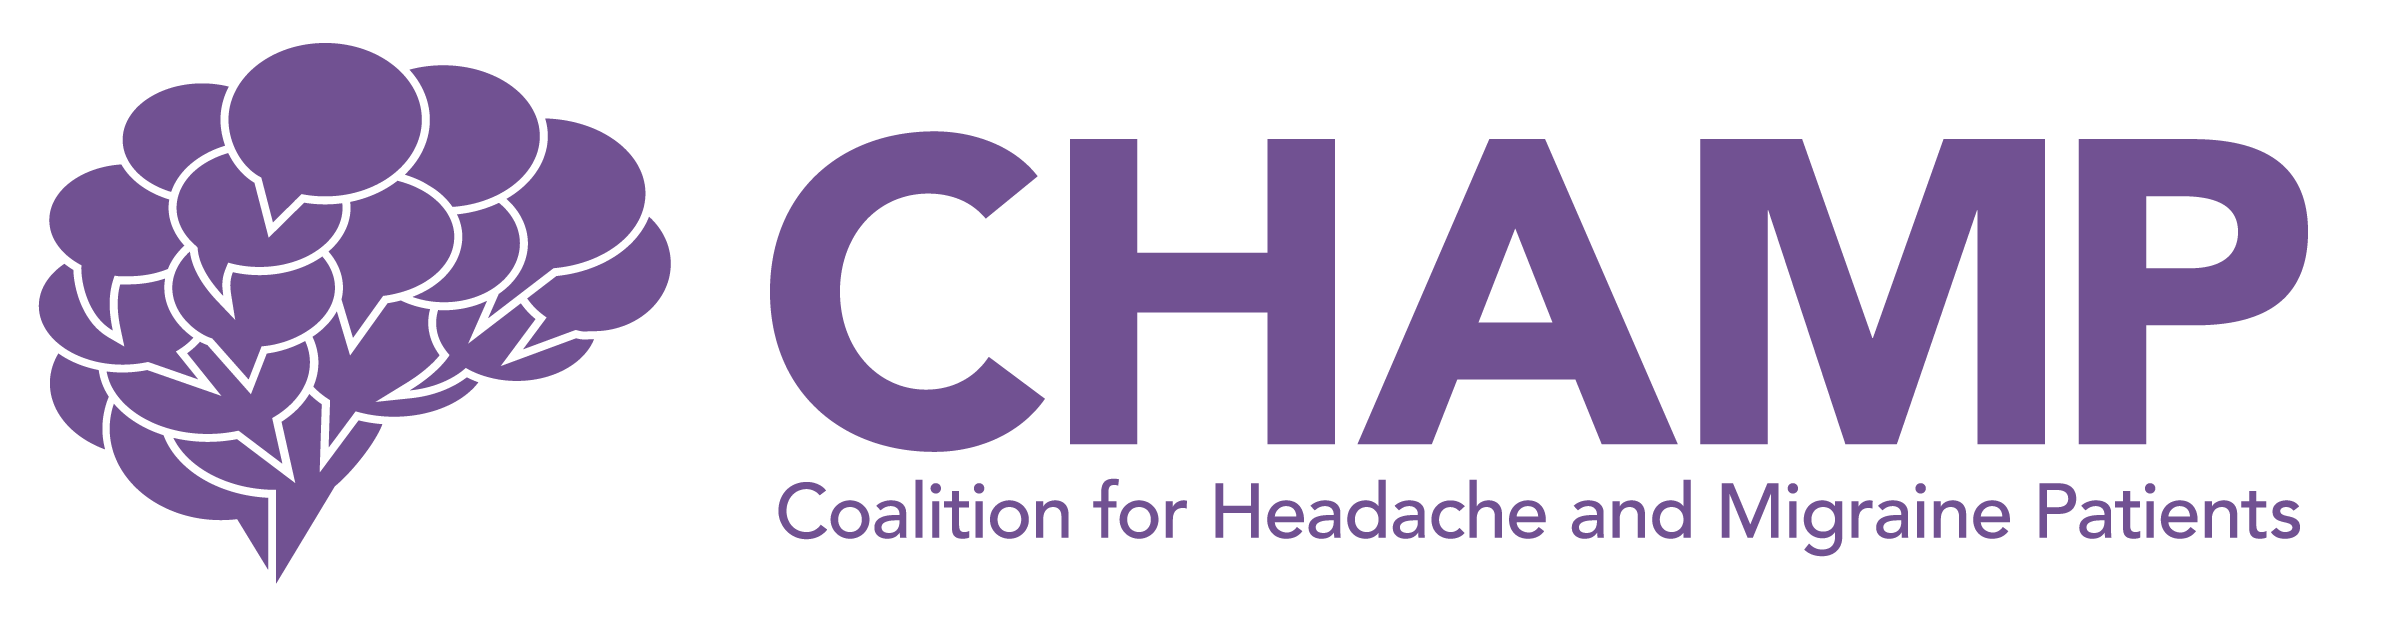 CHAMP coalition for headache and migraine patients